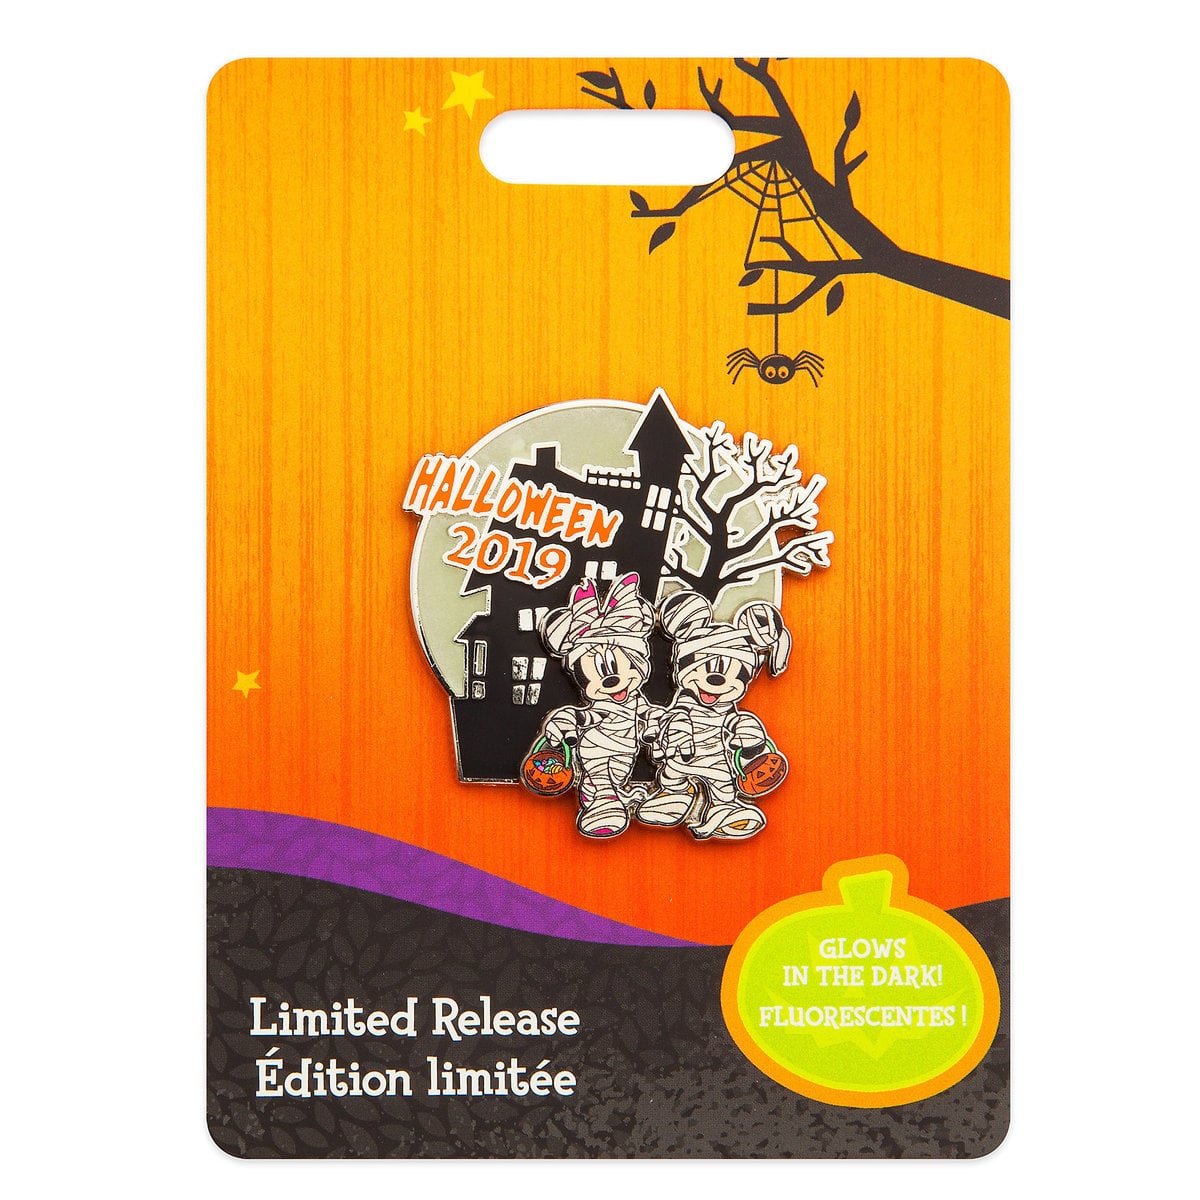 New Disney Halloween Finds Now Available On shopDisney